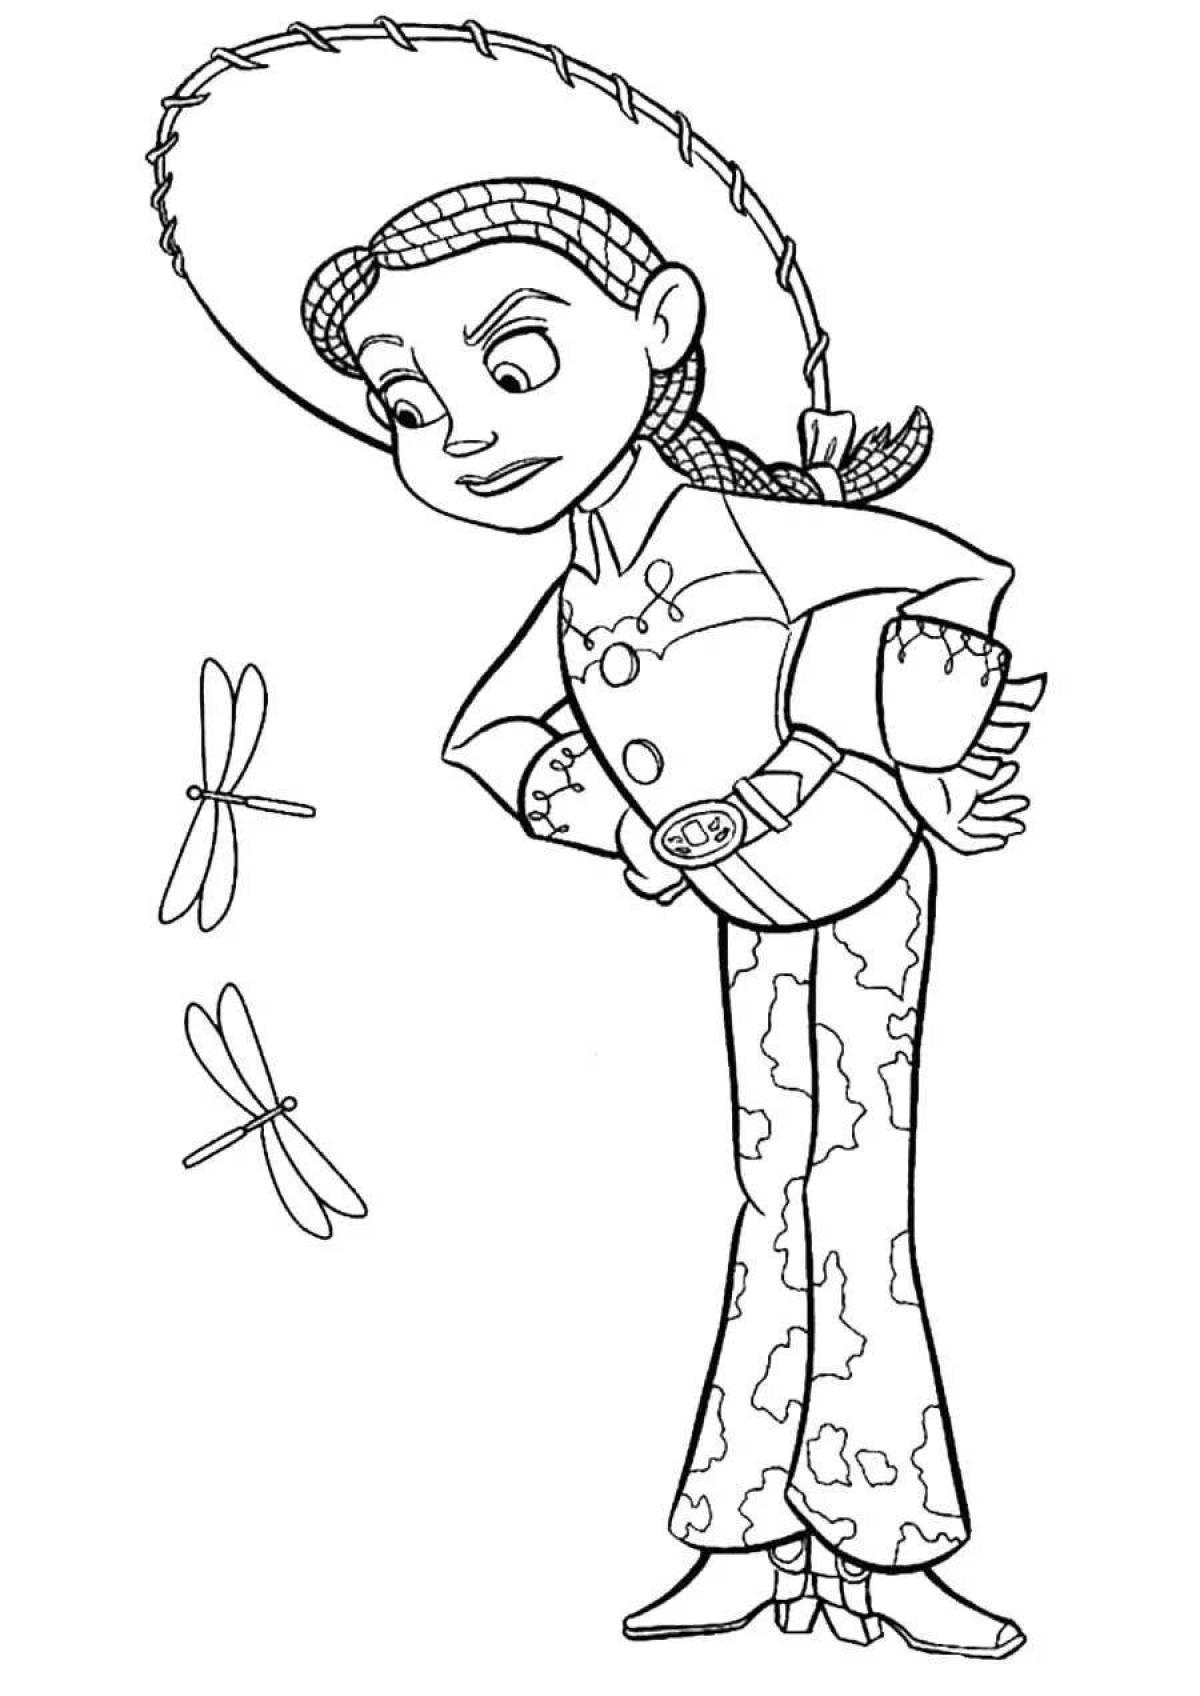 Sweet jessie toy story coloring book